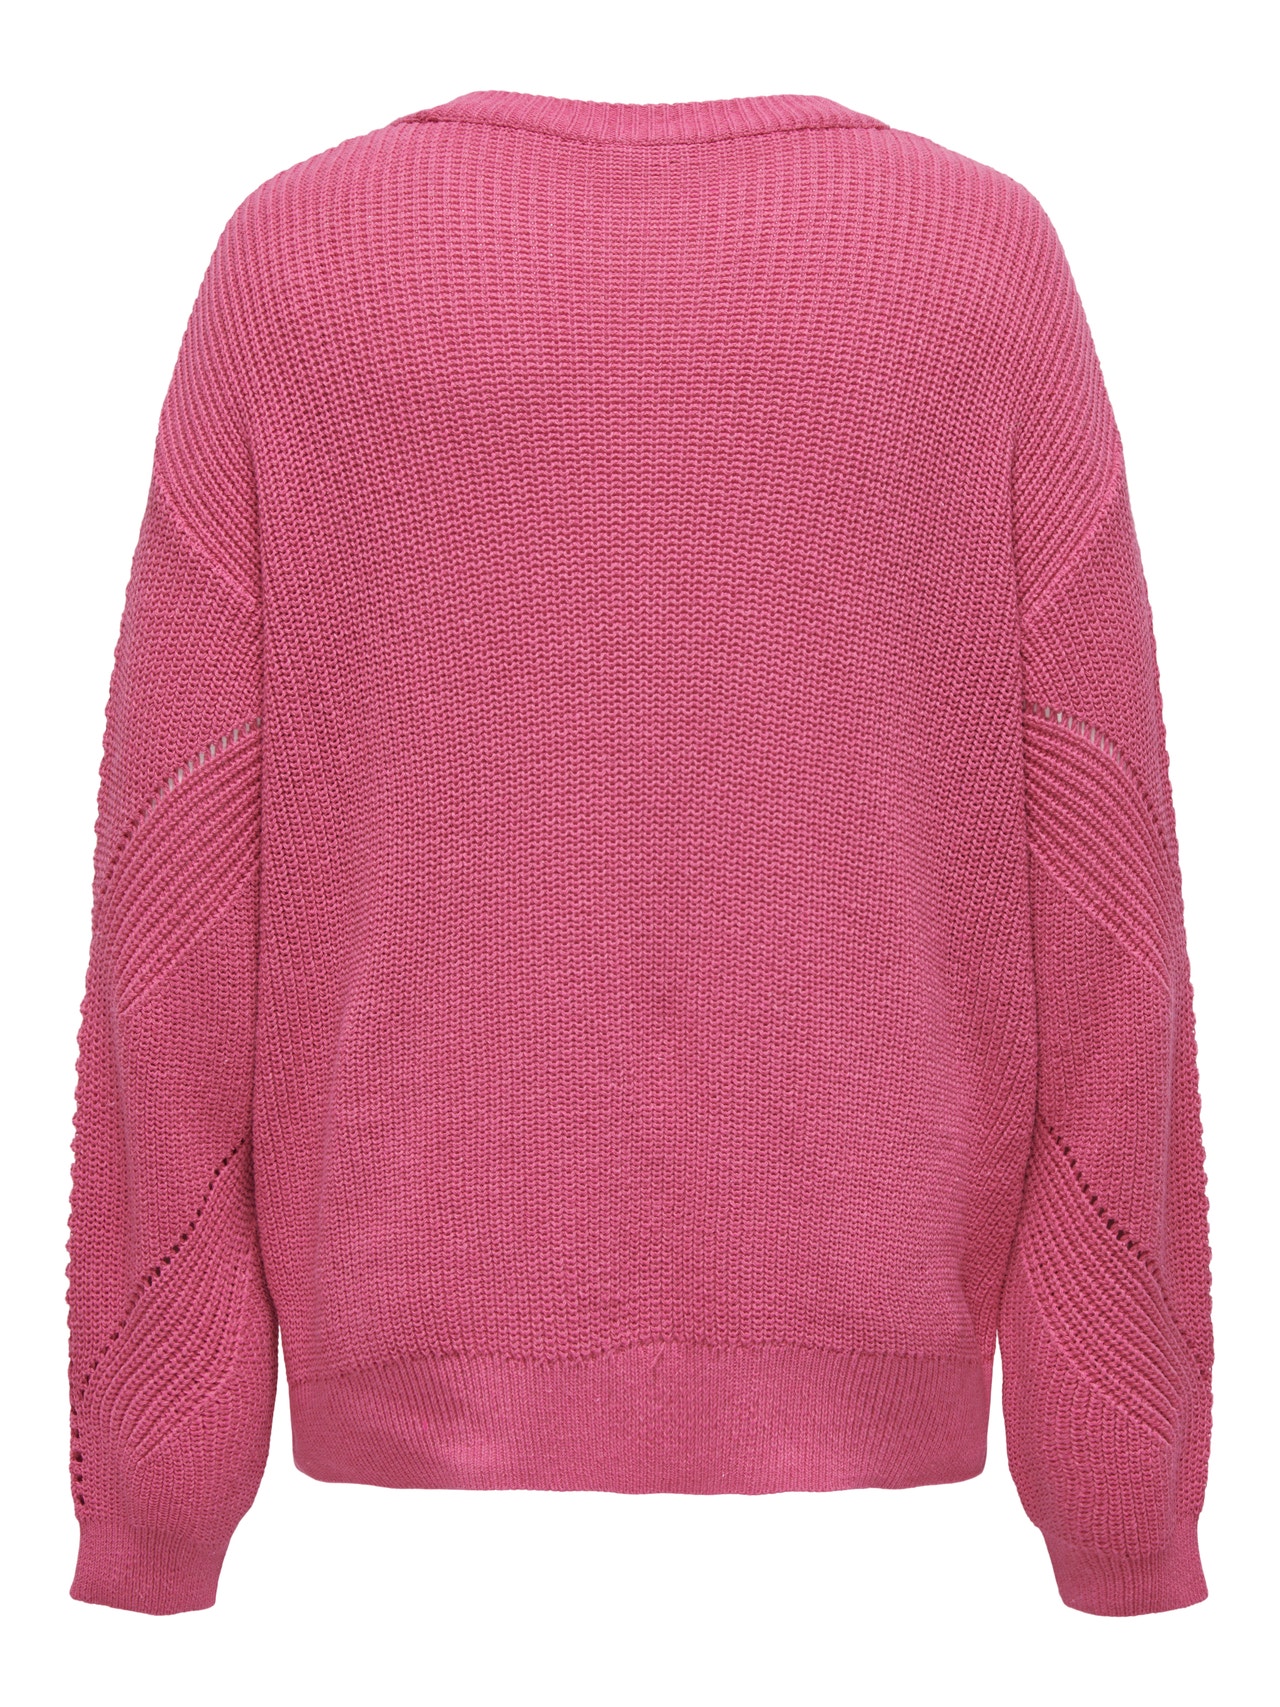 ONLY O-ringning Curve Pullover -Fuchsia Purple - 15296585